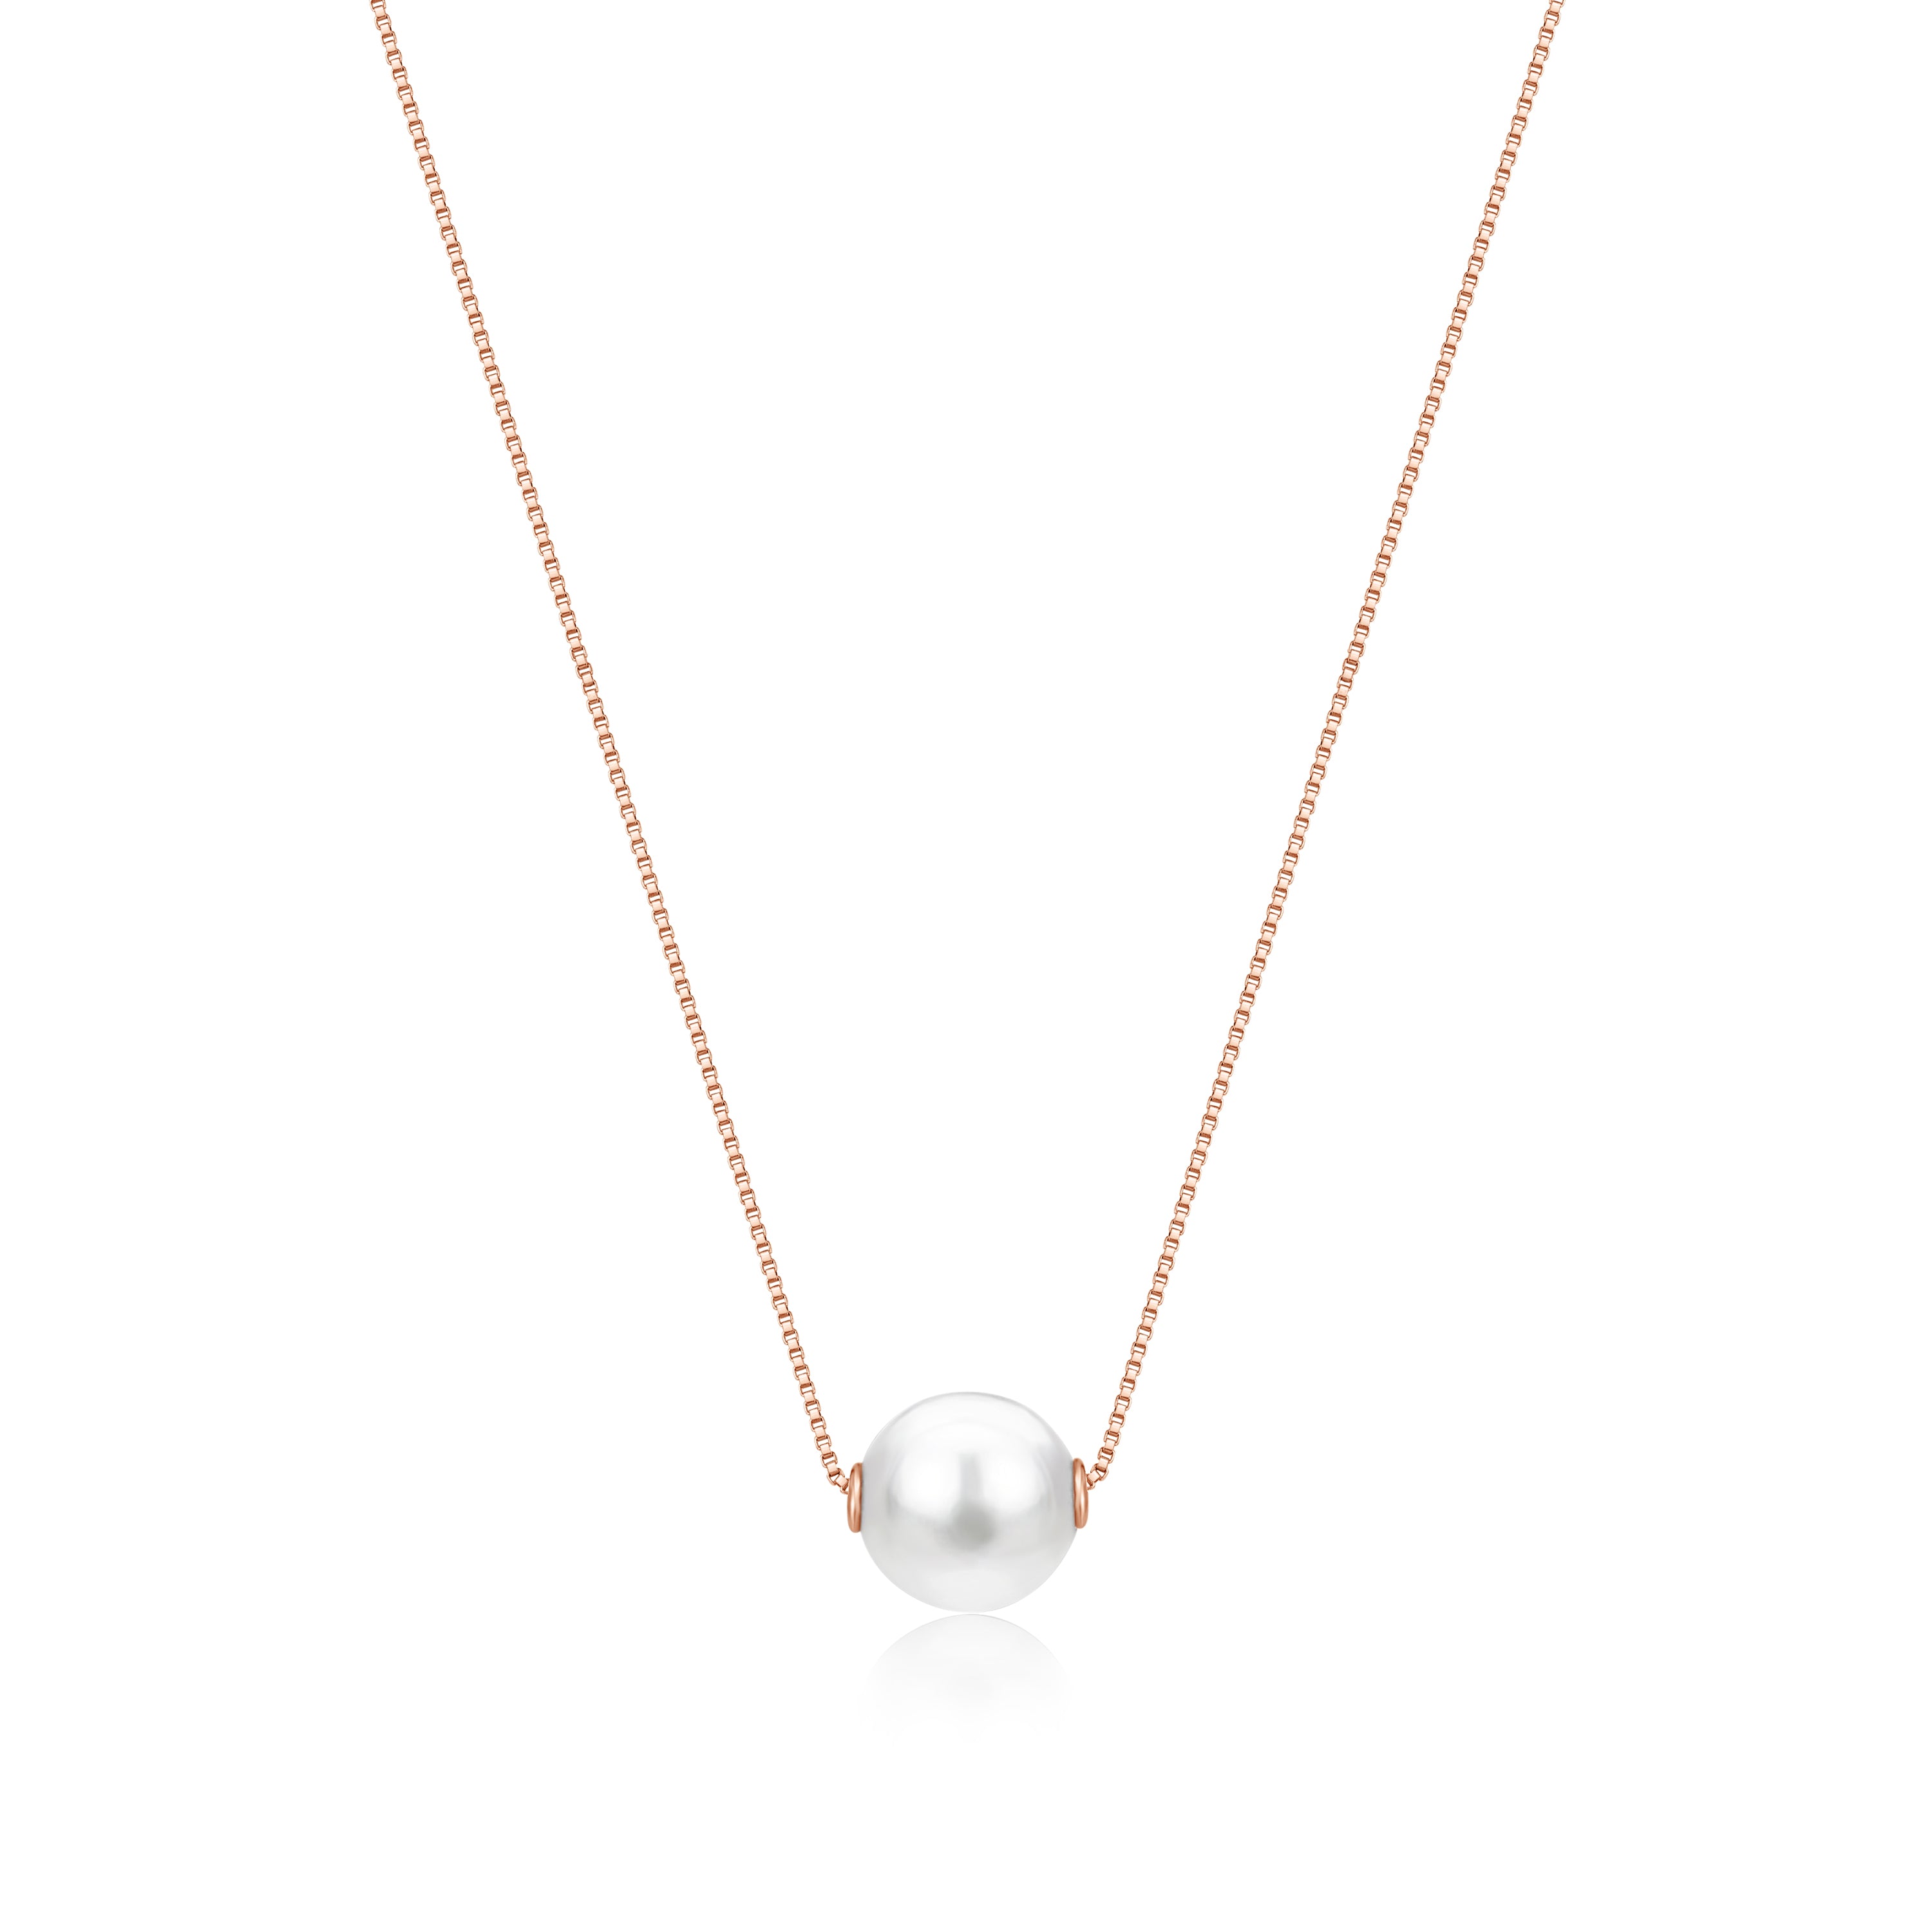 14K Yellow White or Rose Gold Necklace Pendant with Floating Freshwater Cultured Pearl 15.5"